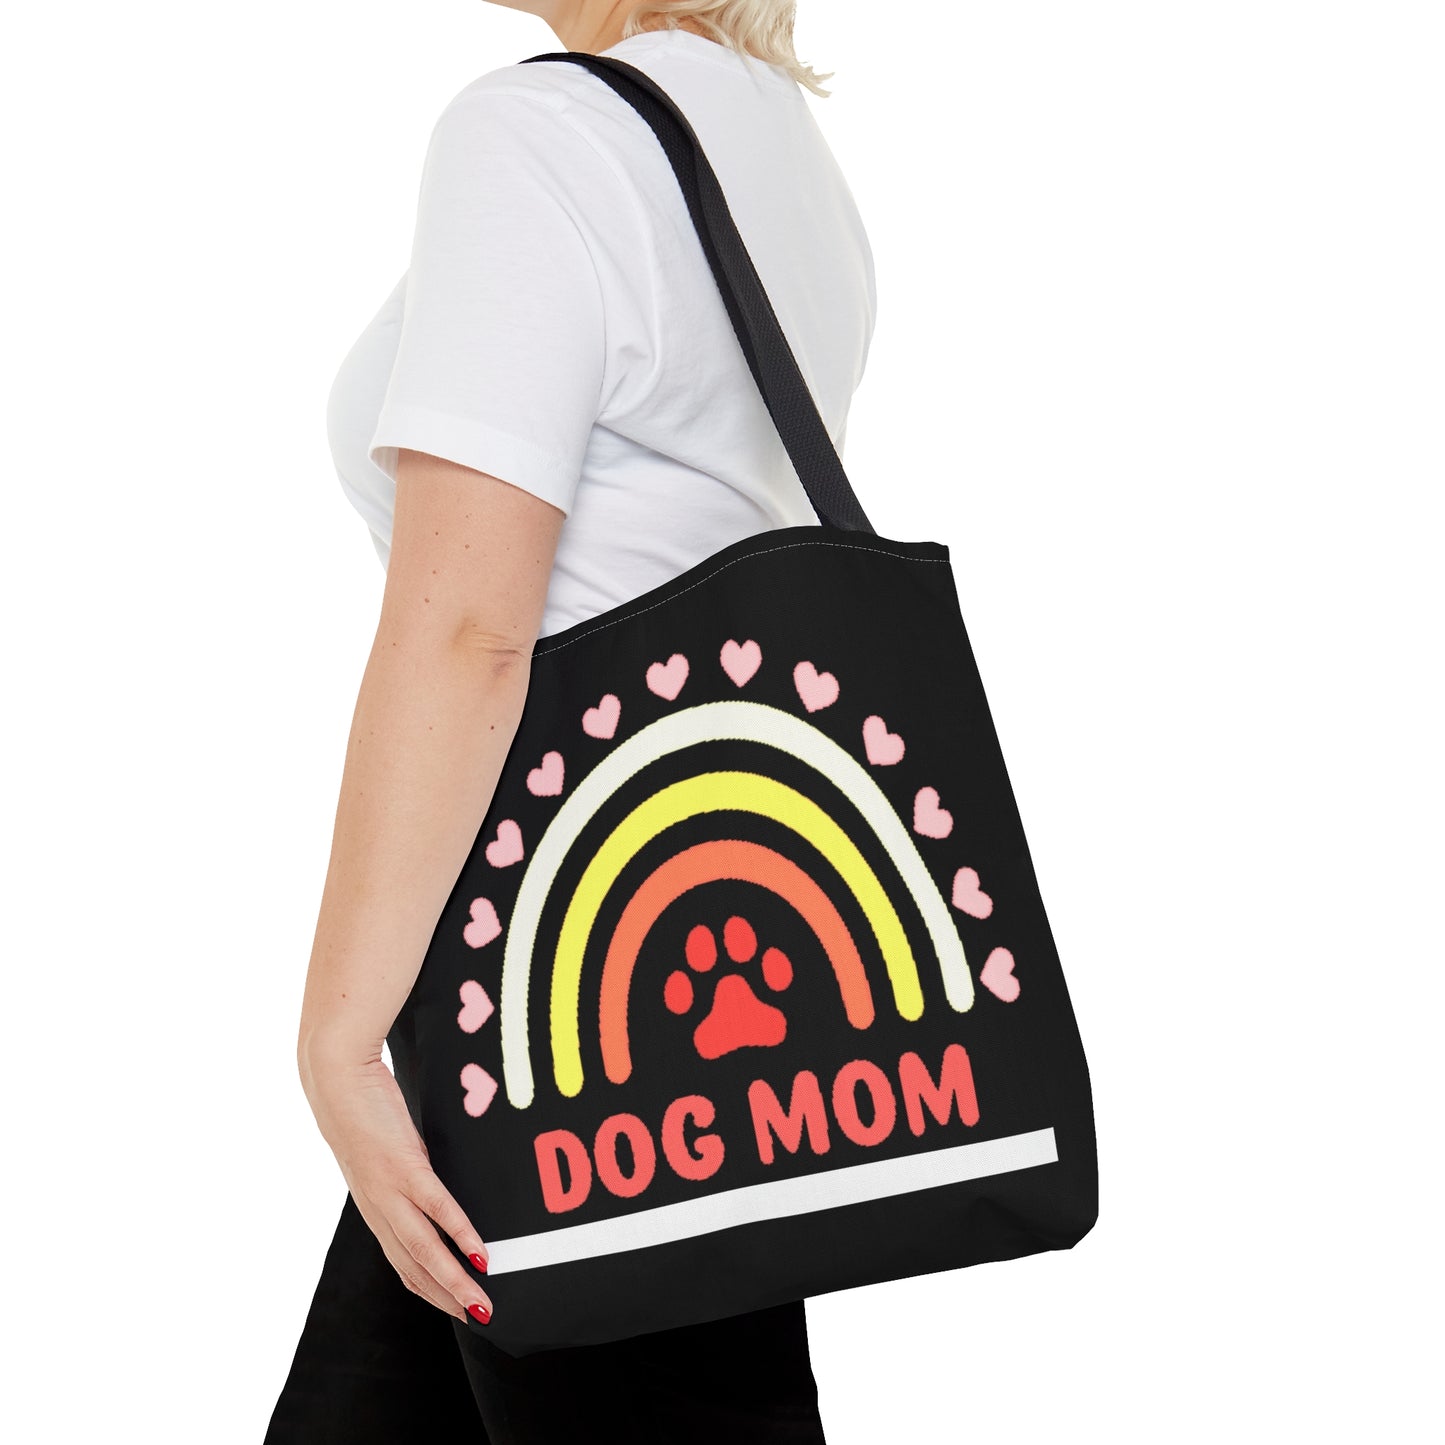 Perfect for Dog Moms, use this Tote Bag to carry everything your lovable doggie needs. Come in 3 sizes to meet your needs. Reusable for all your shopping or trip needs.